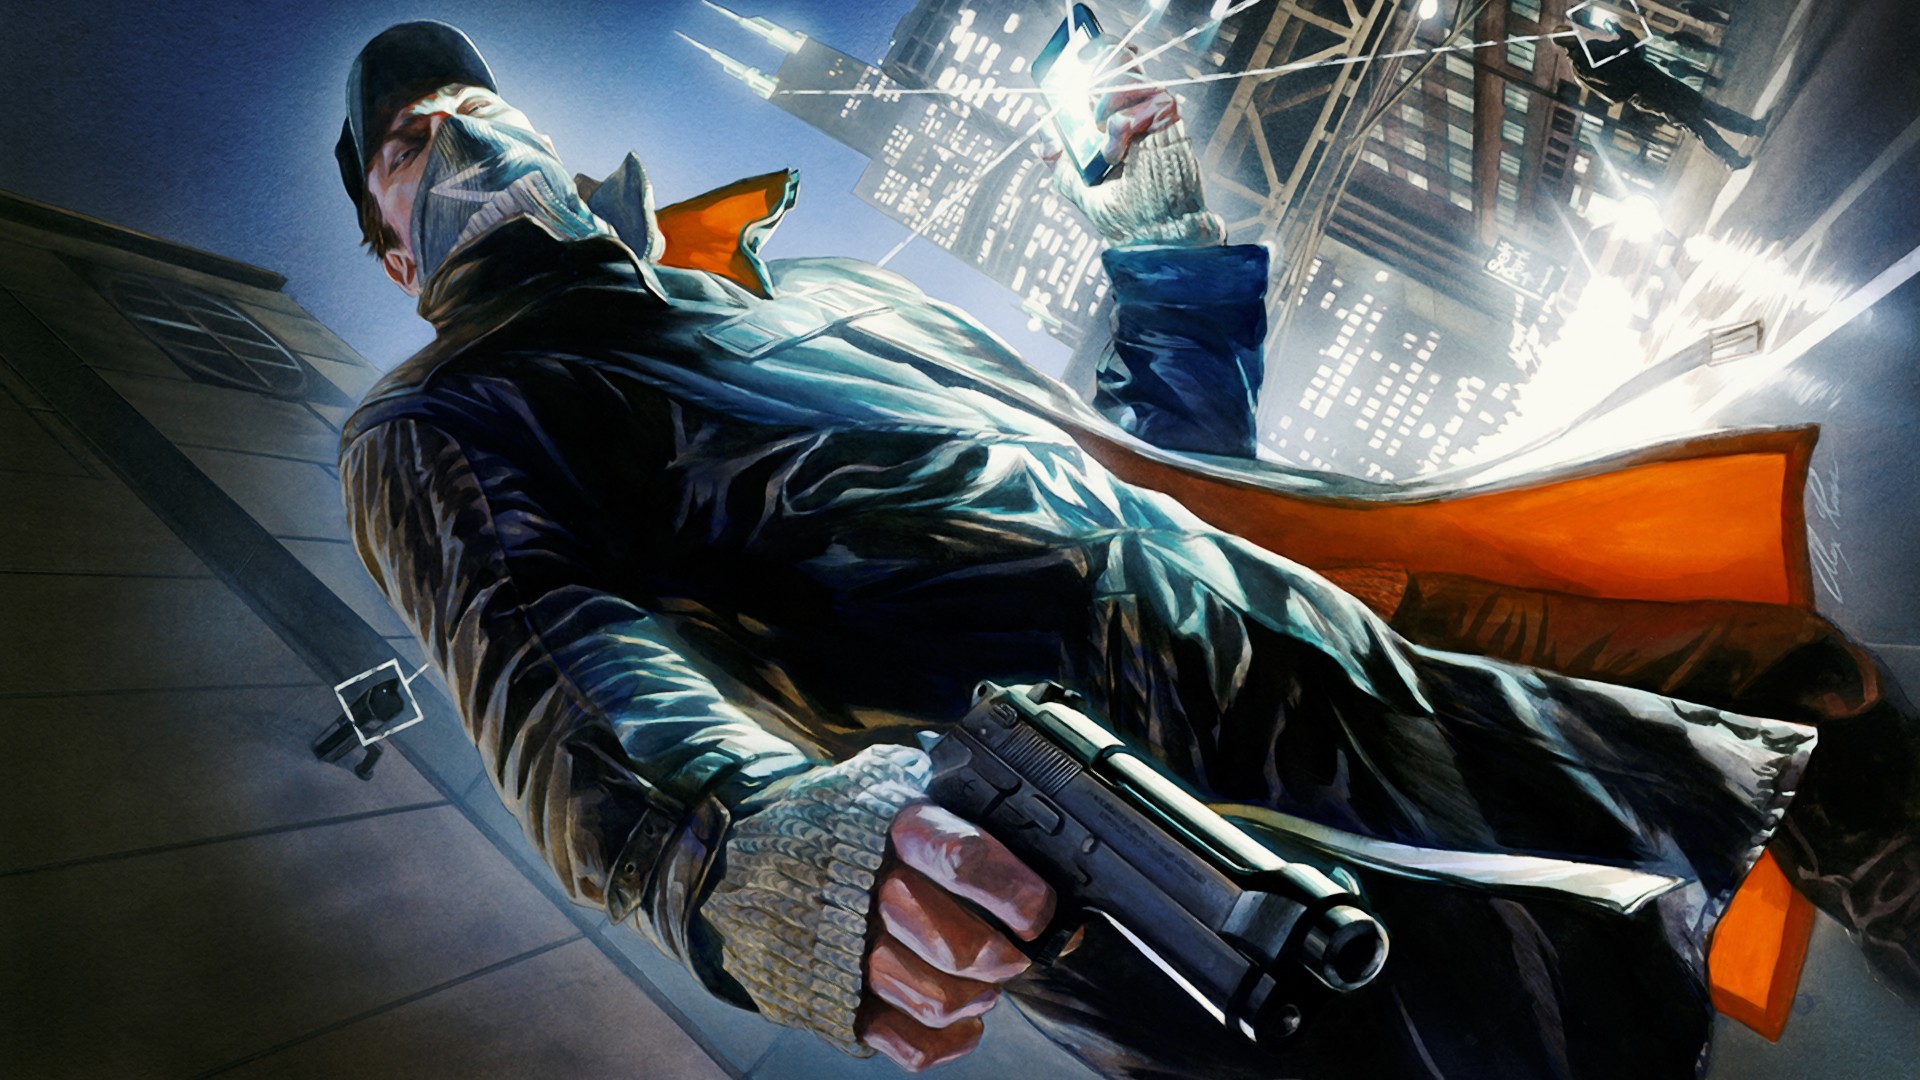 watch dogs A2